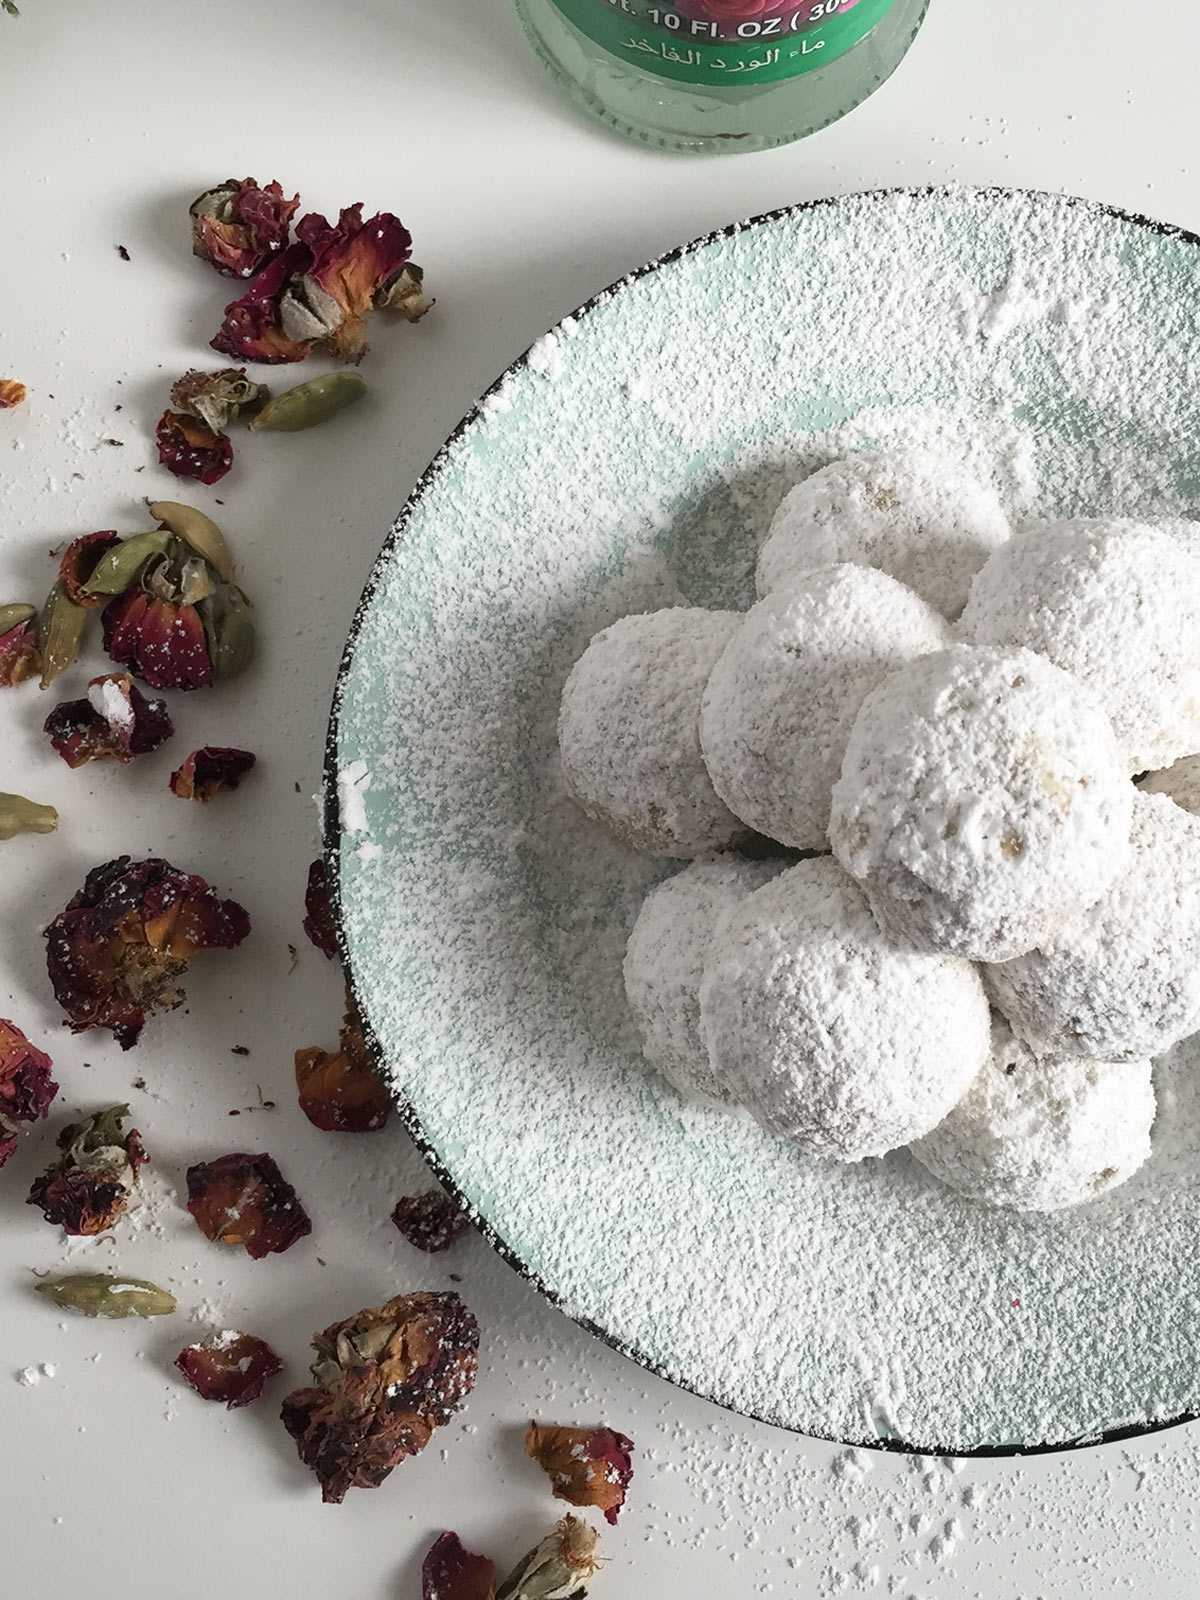 Pistachio snowballs cookies with rose and cardamom on a teal plate dusted with powdered sugar.